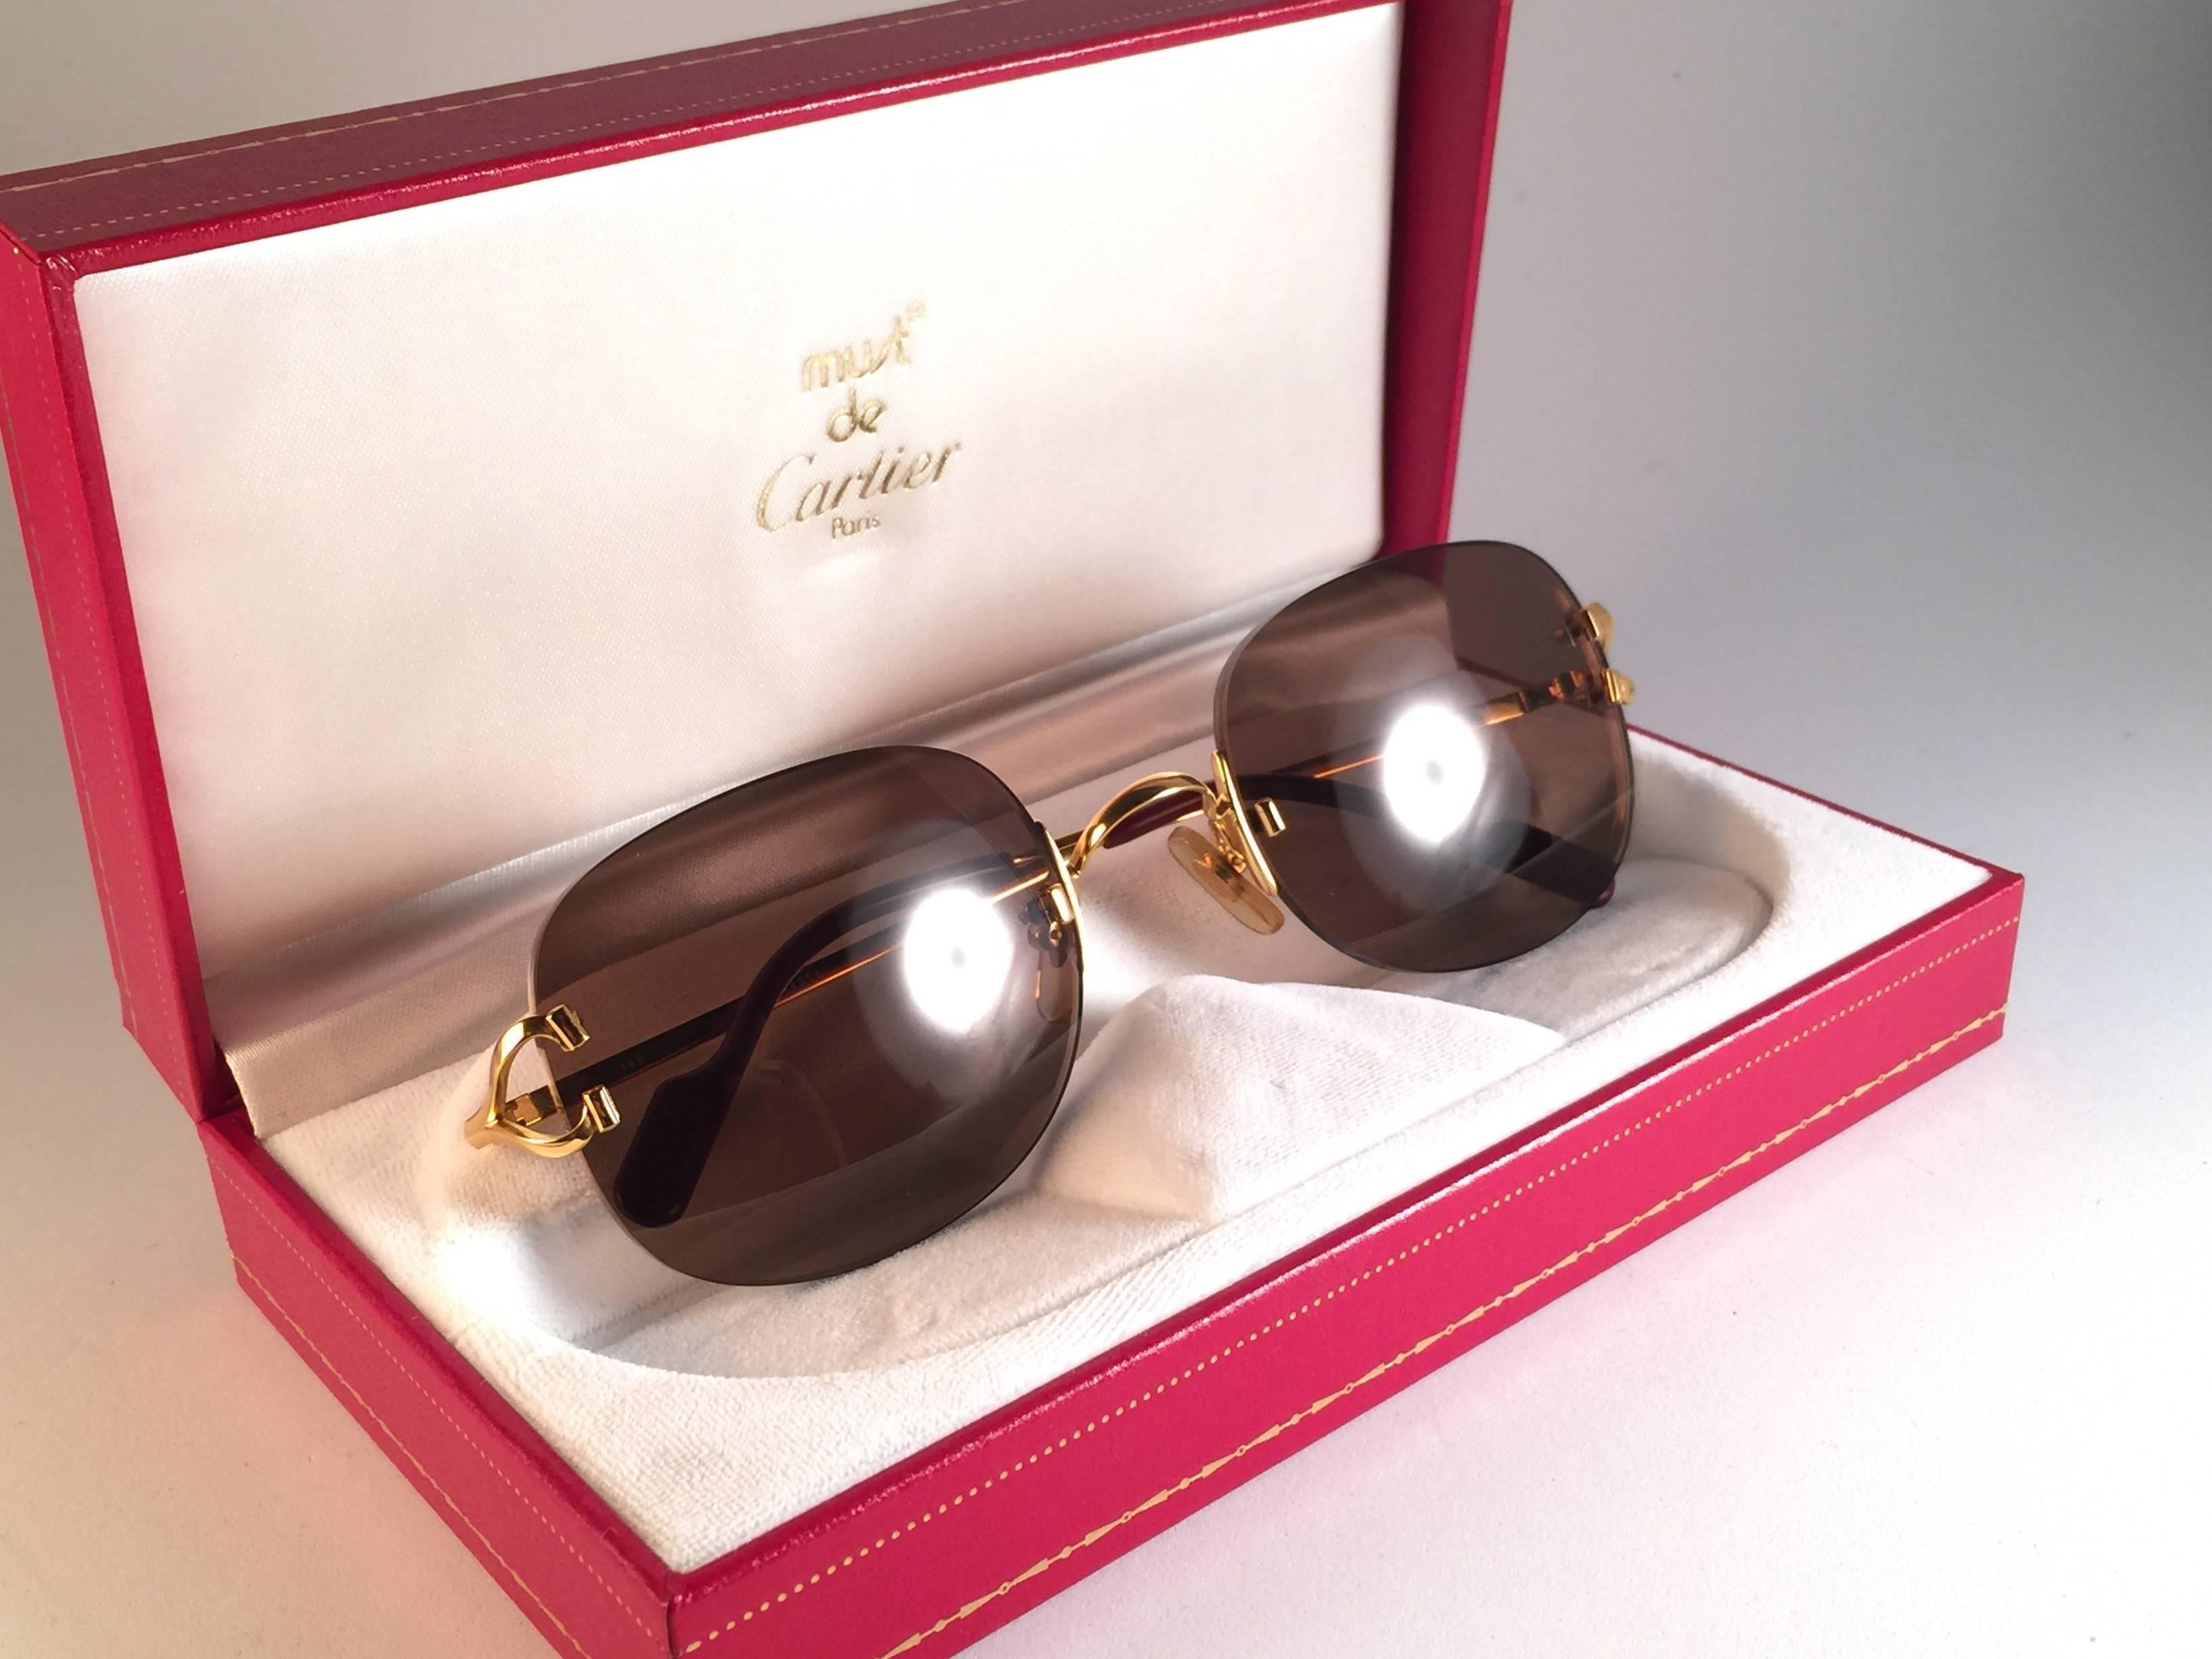 New Cartier Serrano unique rimless sunglasses with brown cartier (uv protection) lenses.  Frame with the front and sides in gold. All hallmarks. Cartier gold signs on the black ear paddles.  These are like a pair of jewels on your nose.  Beautiful